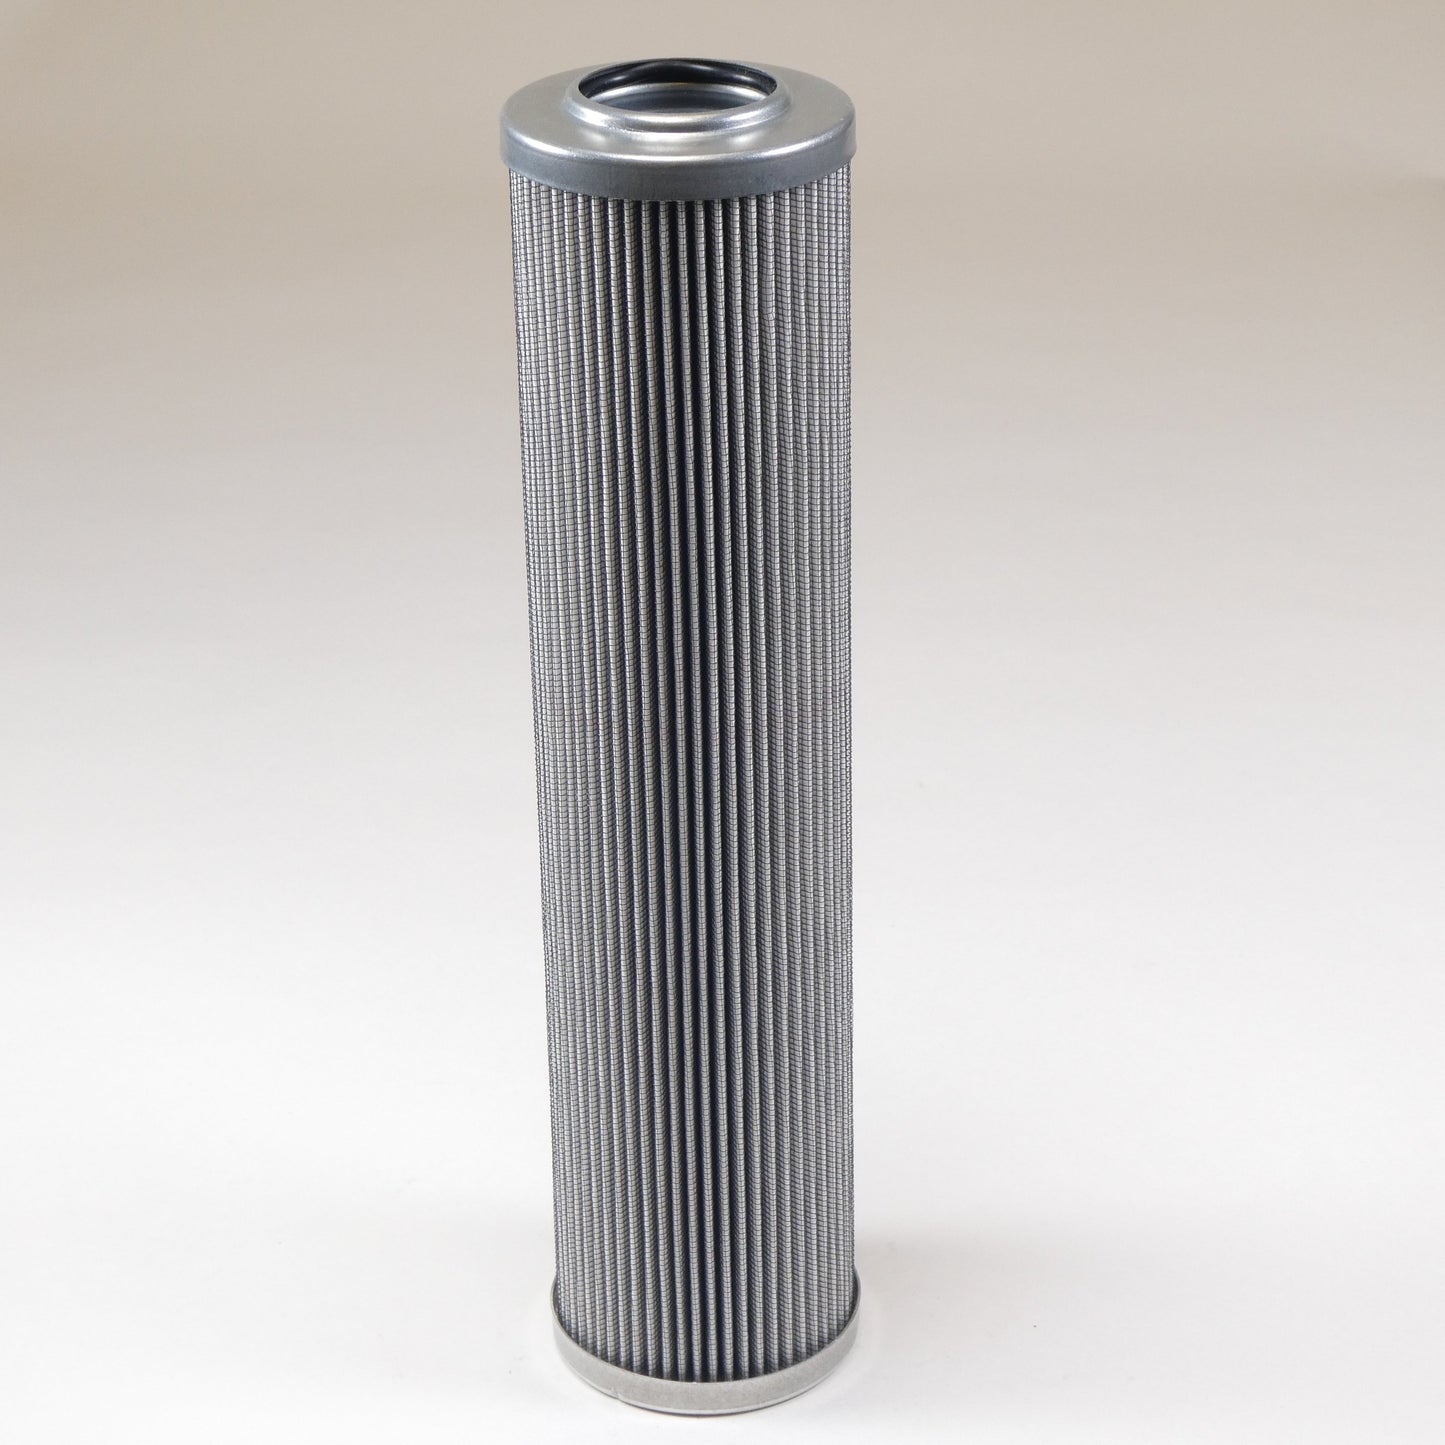 Hydrafil Replacement Filter Element for Diagnetics LPA313V12